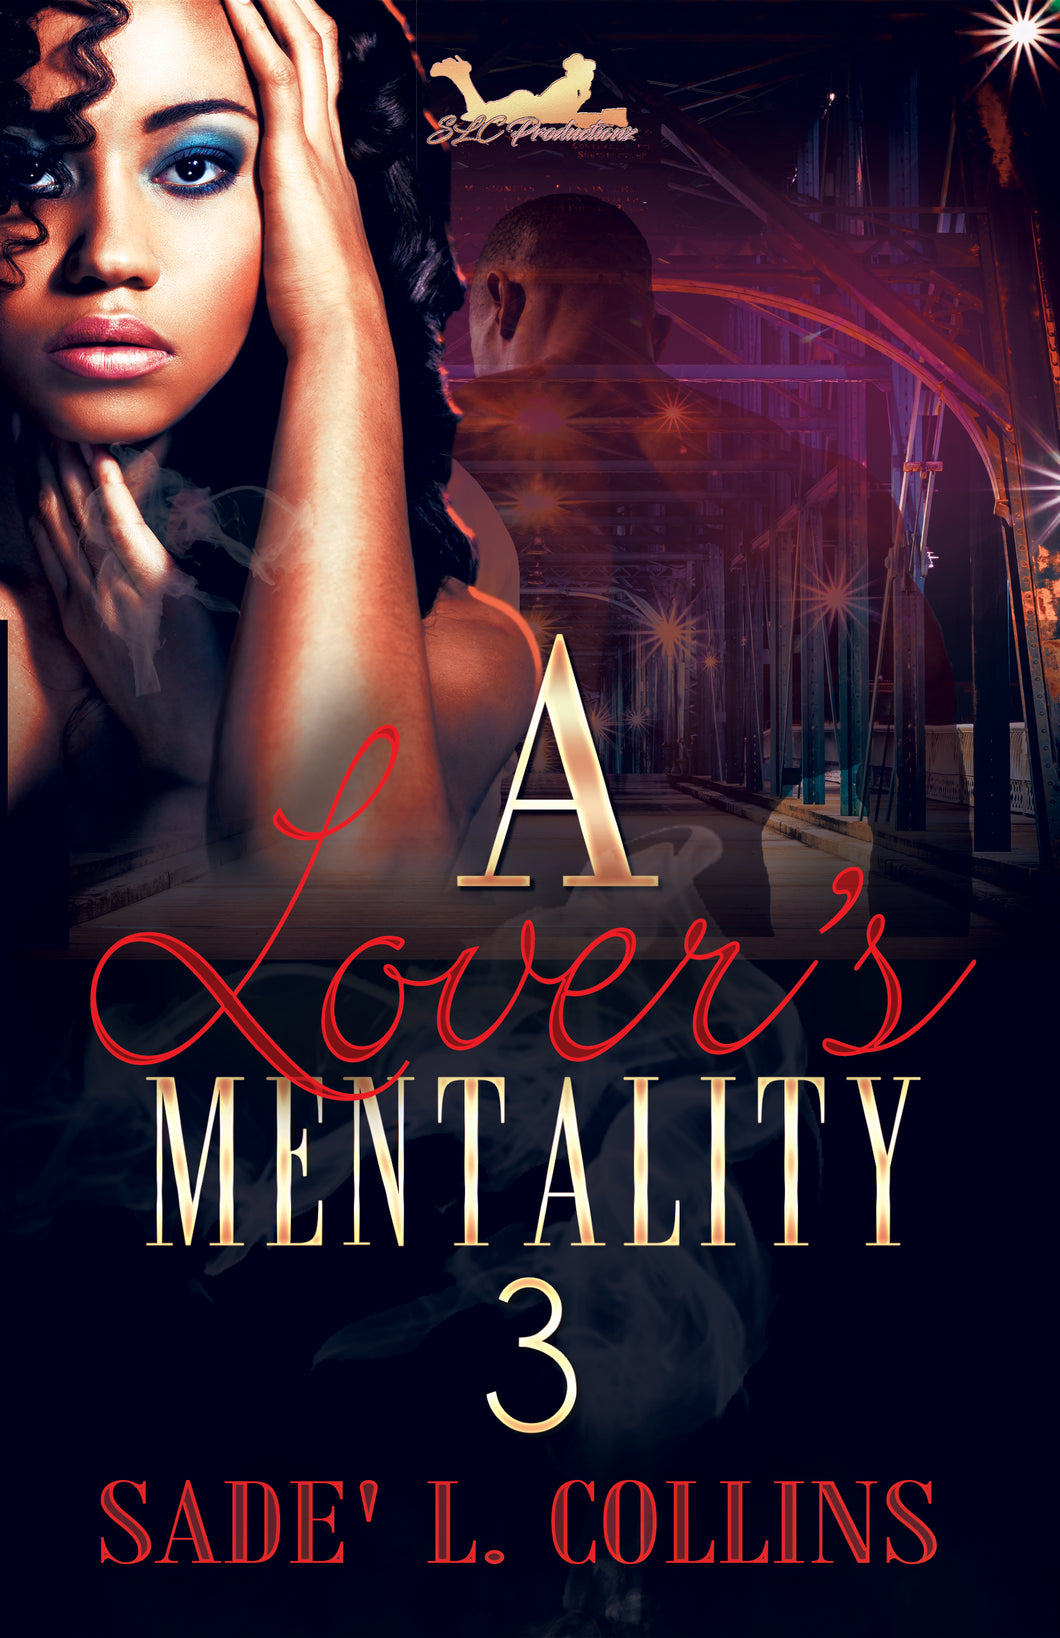 A Lovers Mentality 3 (Available Now)